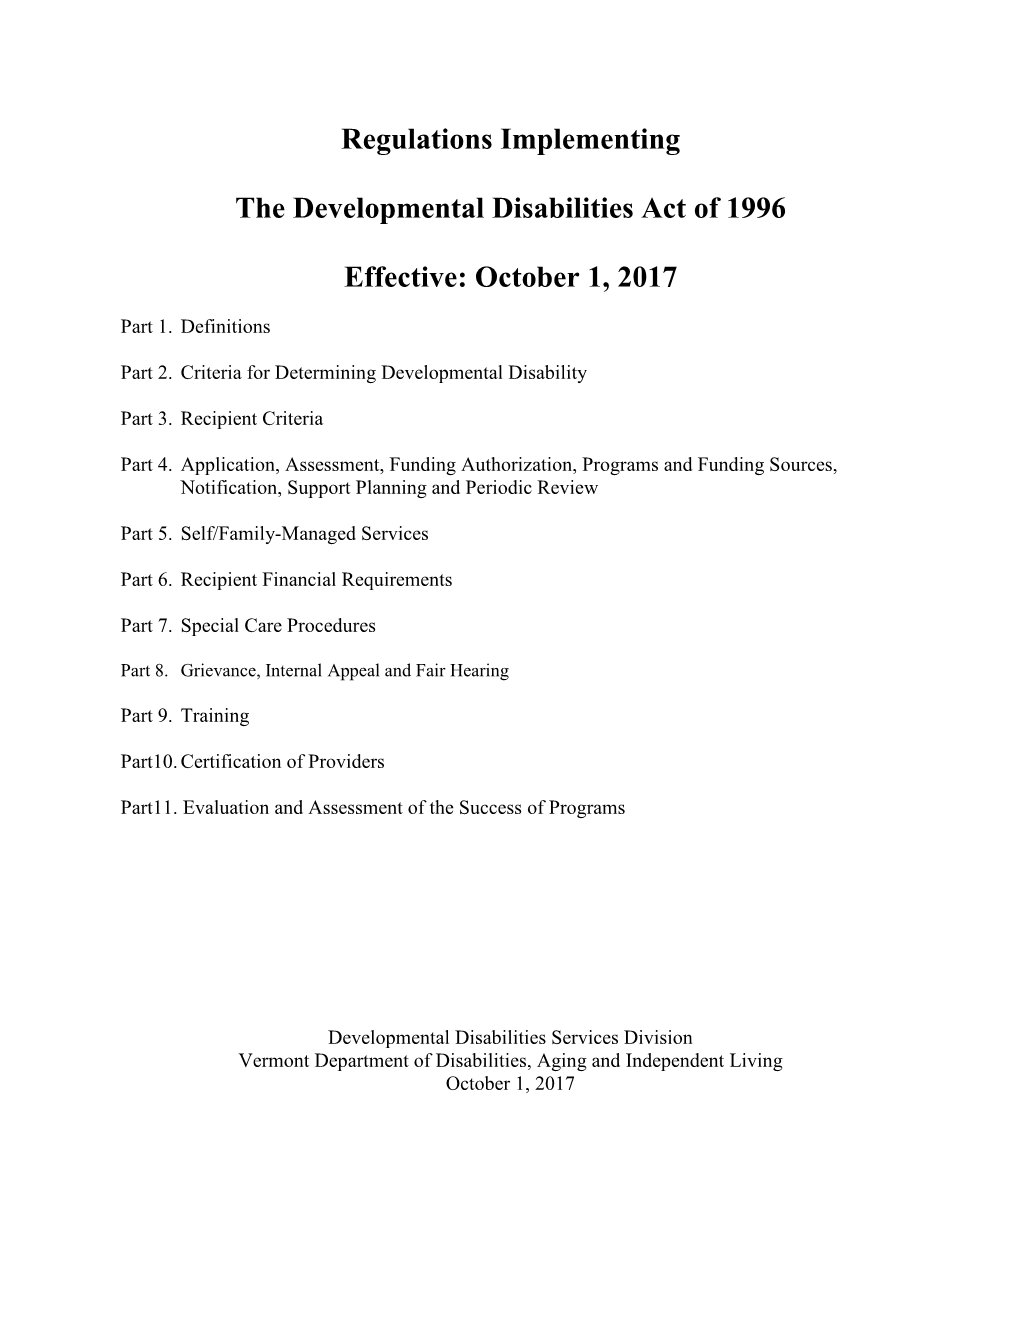 Regulations Implementing the Developmental Disabilities Act of 1996 ______